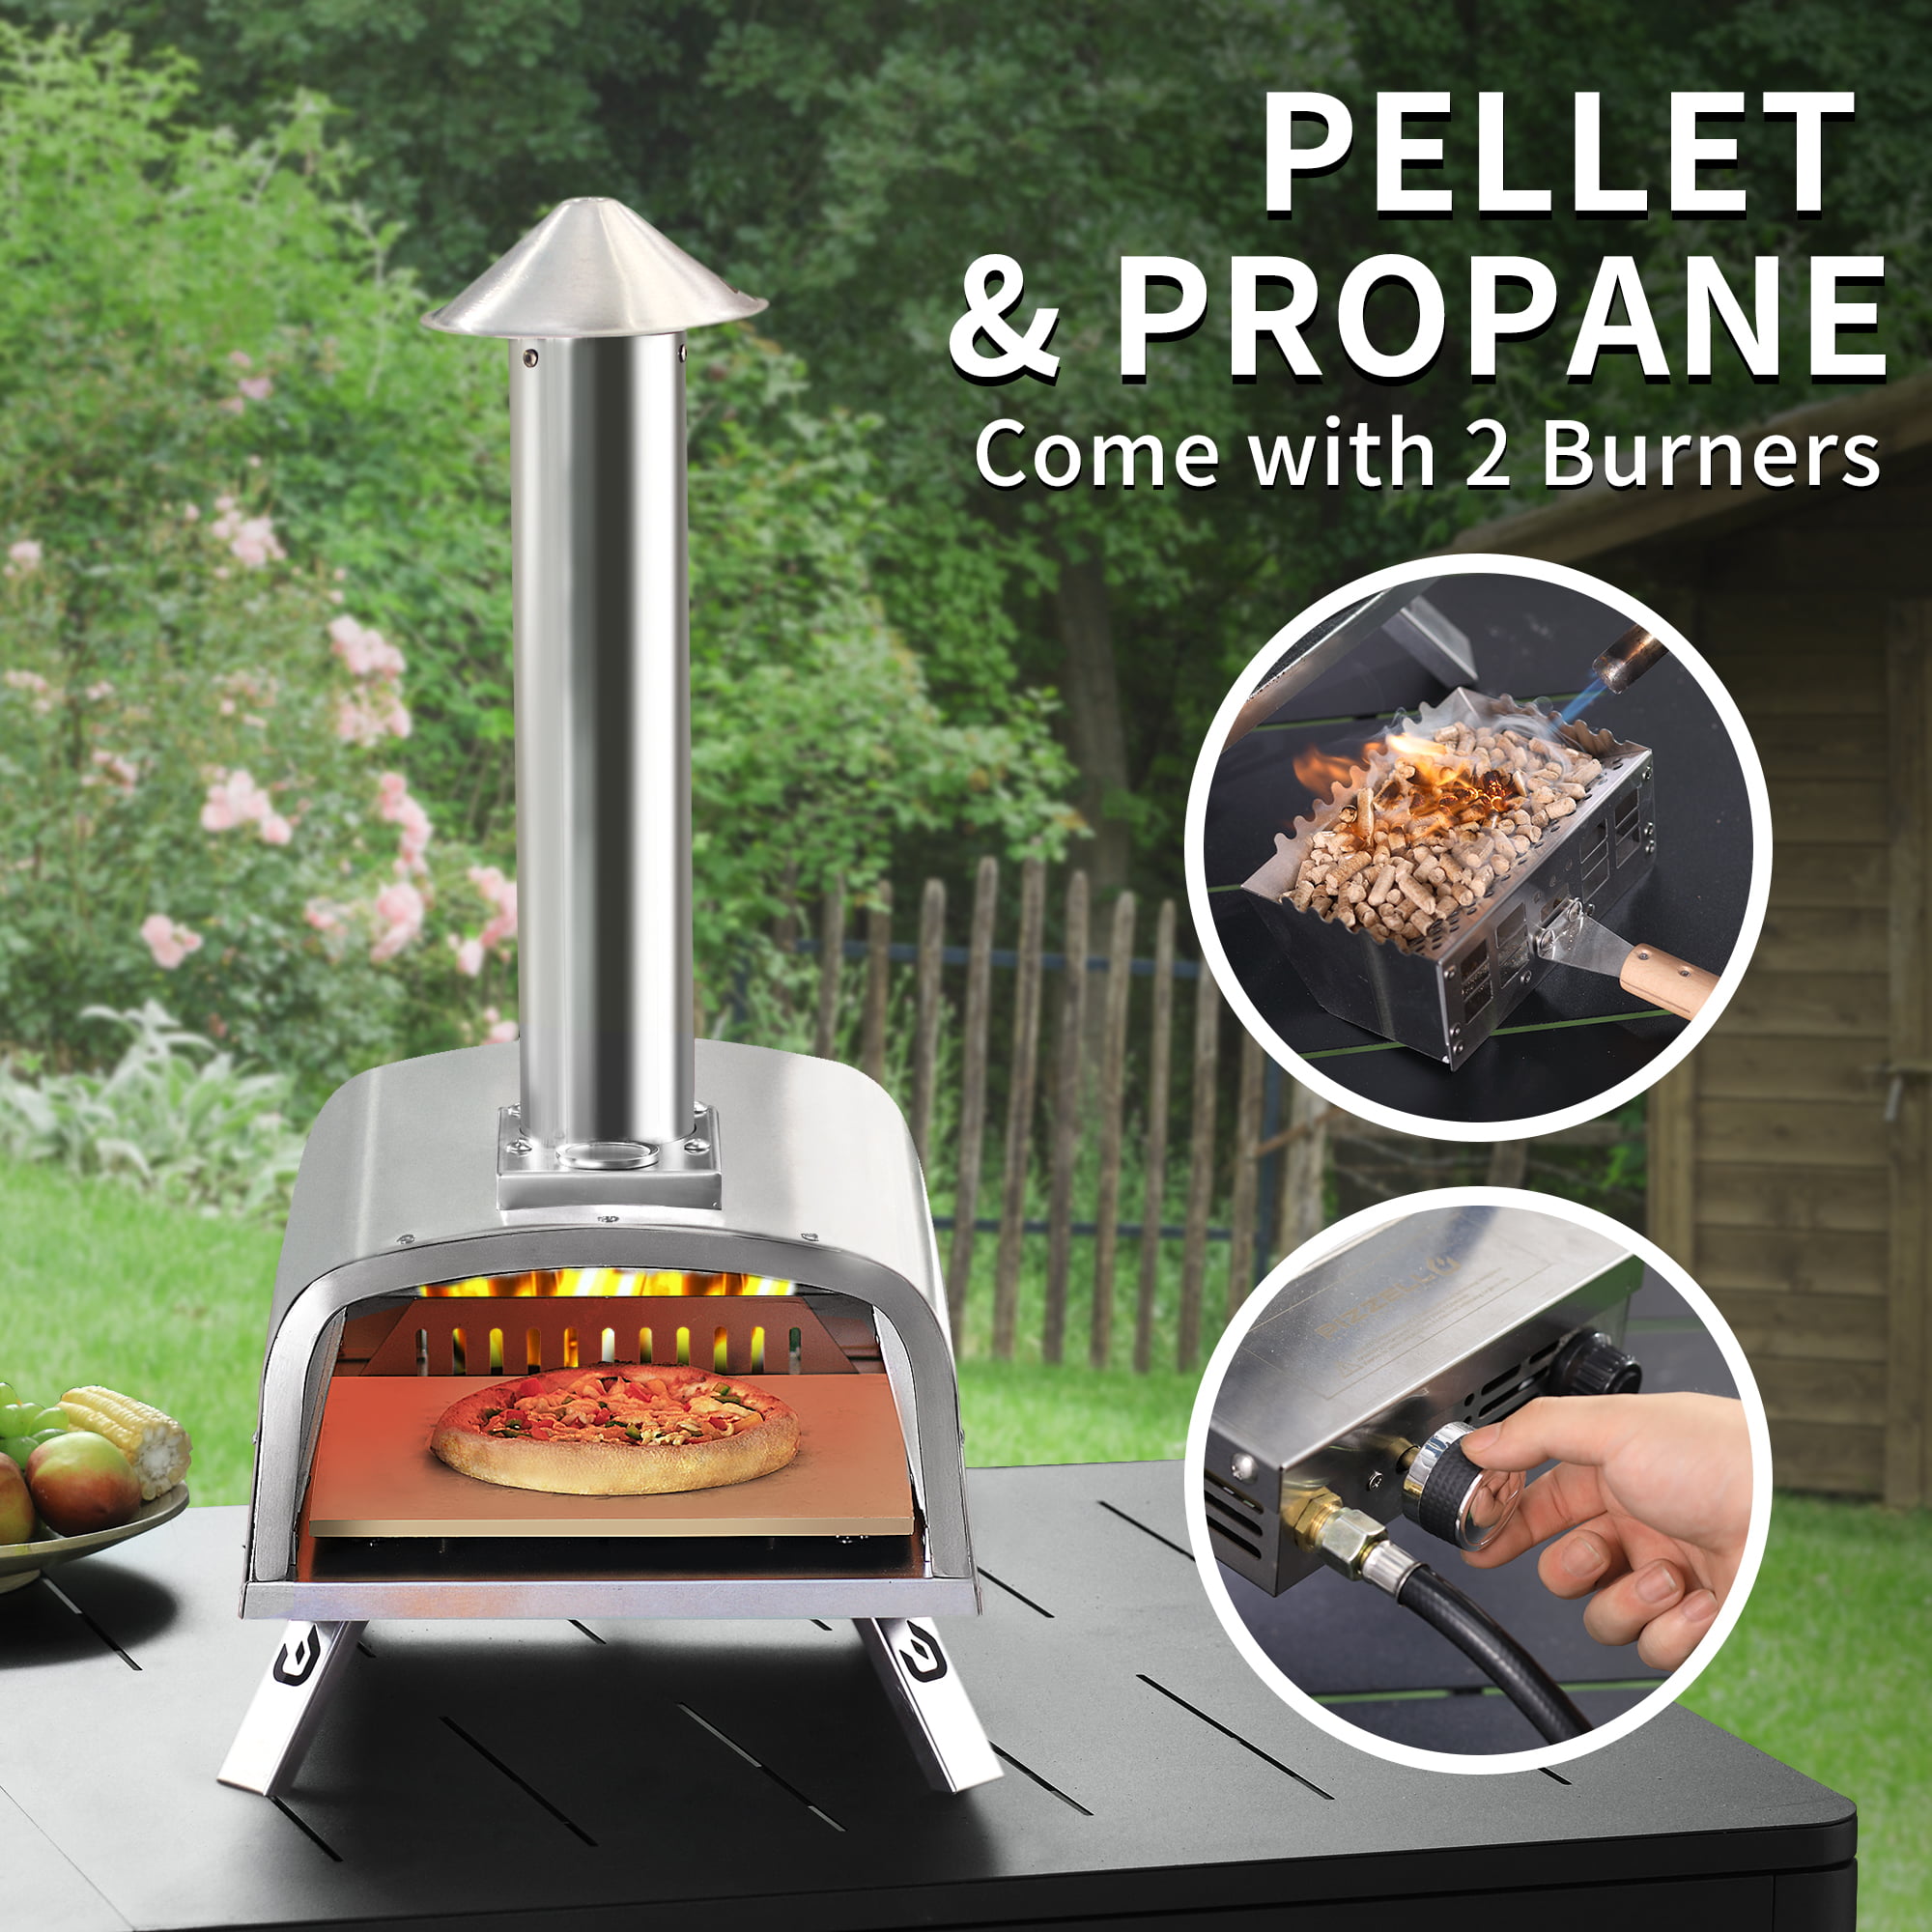 Pizzello Outdoor Pizza Oven Wood Burning for Cooking 2 Pizzas Outside Pizza Maker with Pizza Stone, Pizza Peel, Cover - Black + Silver